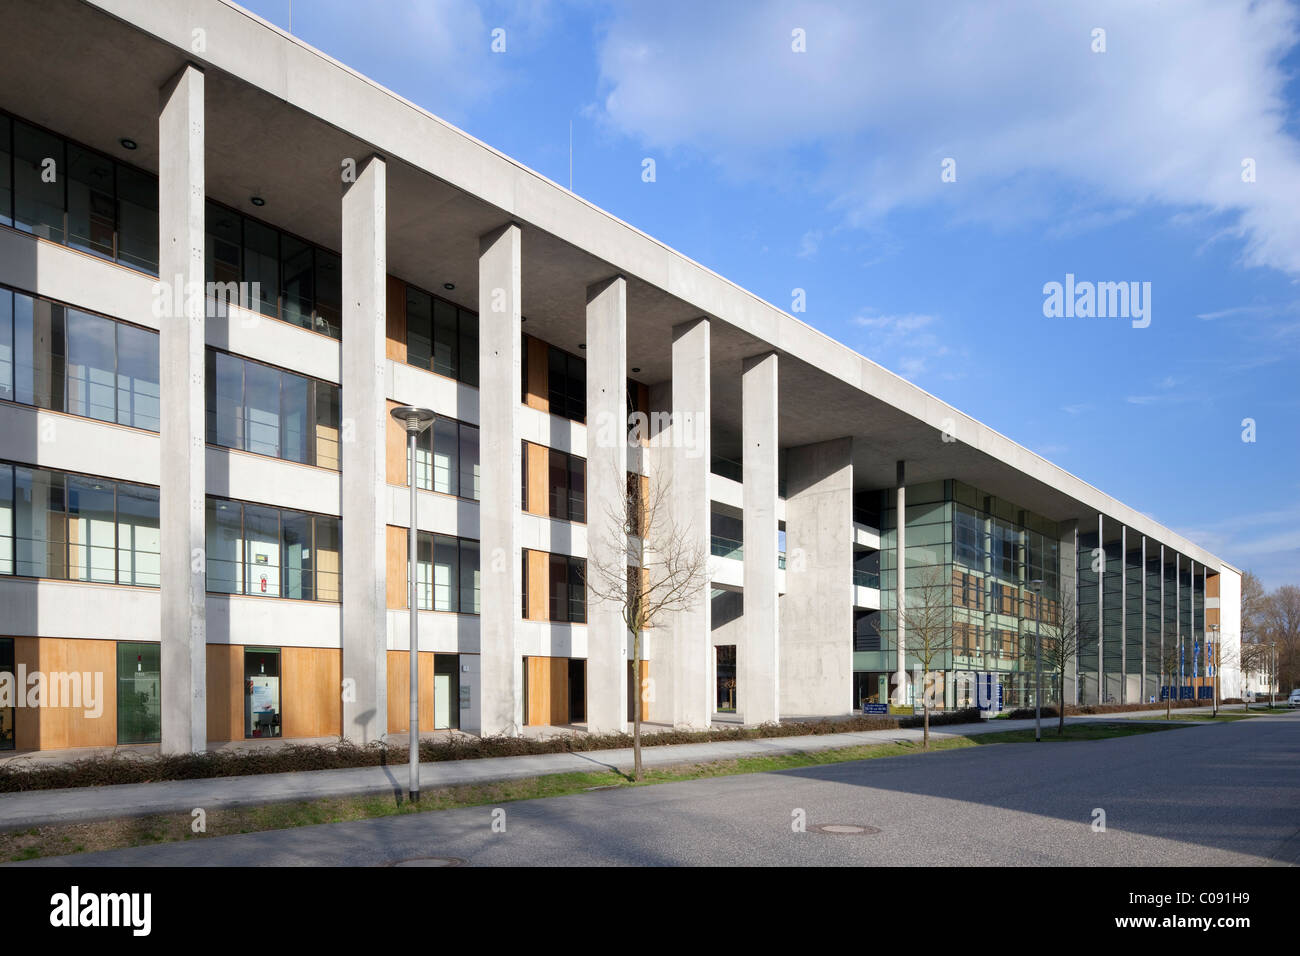 Centre for Environmental, Bio-, and Energy Technology, Adlershof Science City, Berlin, Germany, Europe Stock Photo